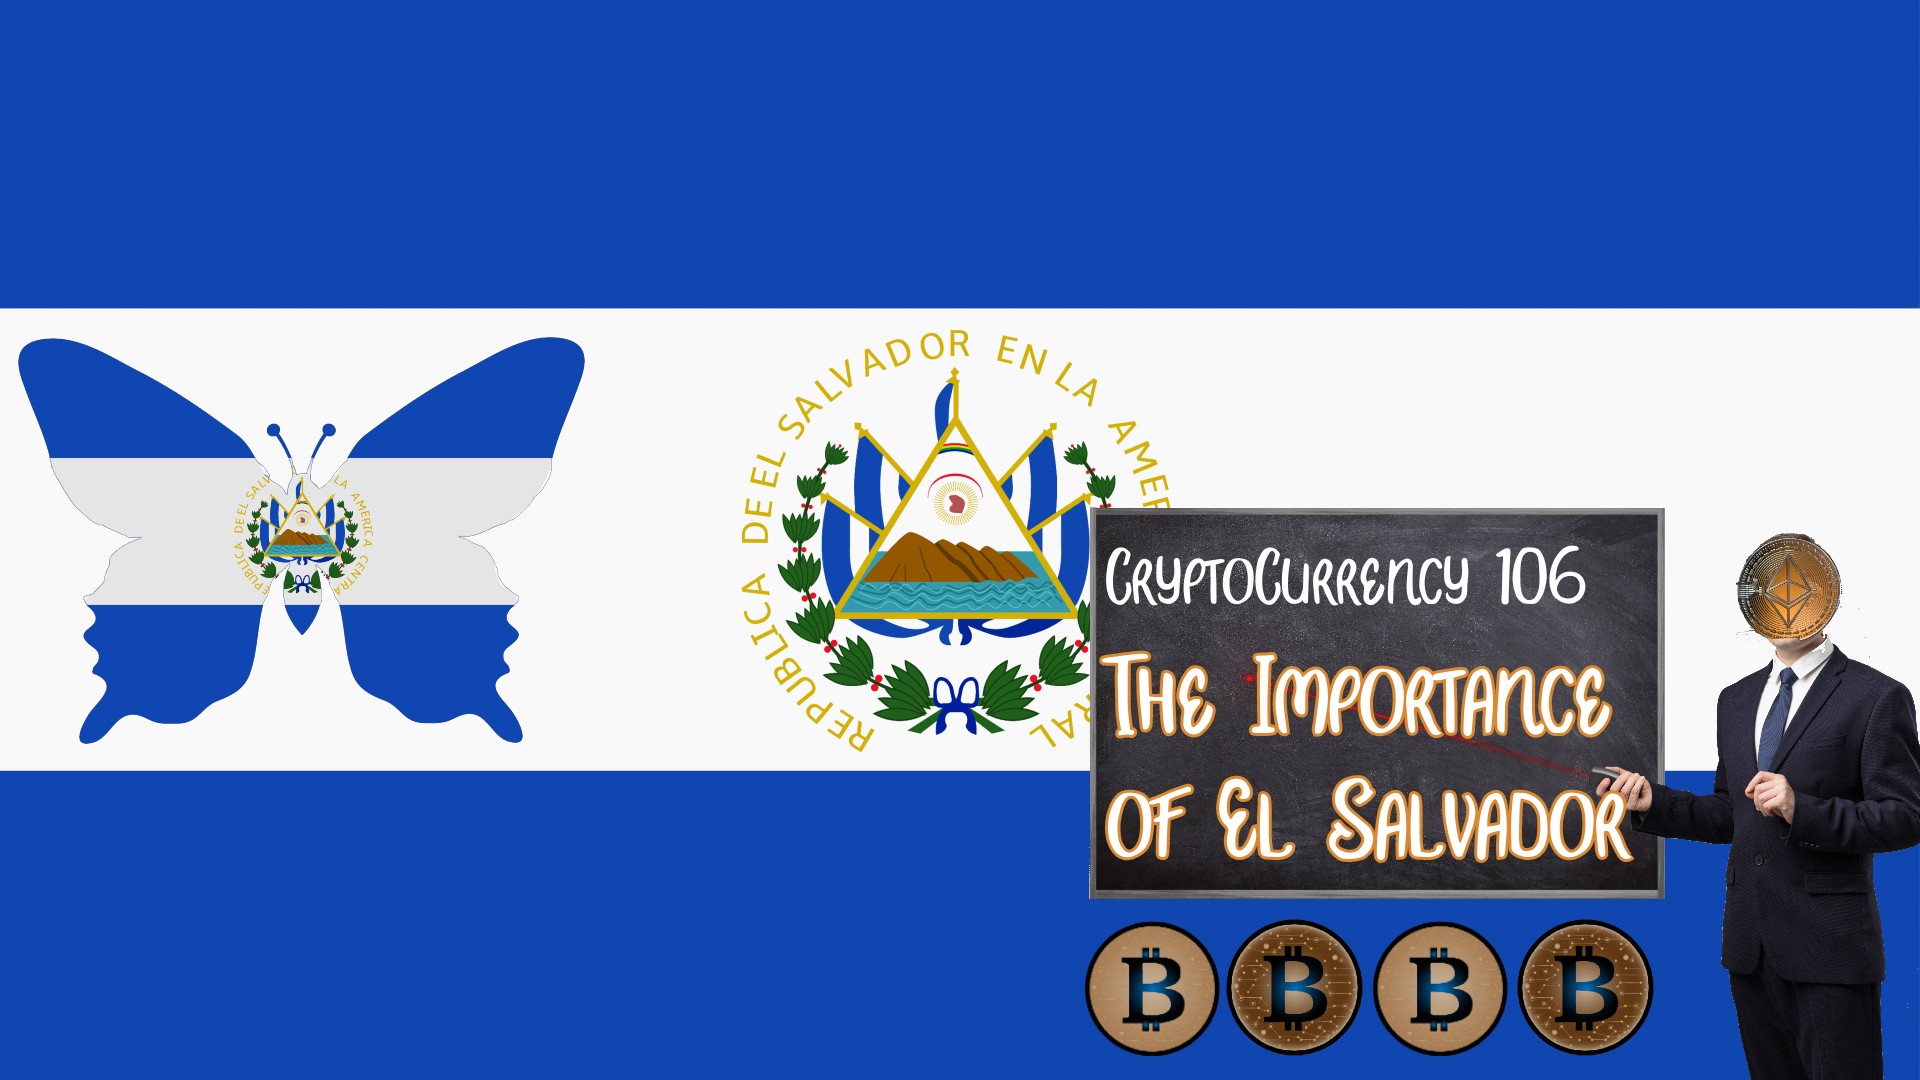 CryptoCurrency 106: The Importance of El Salvador